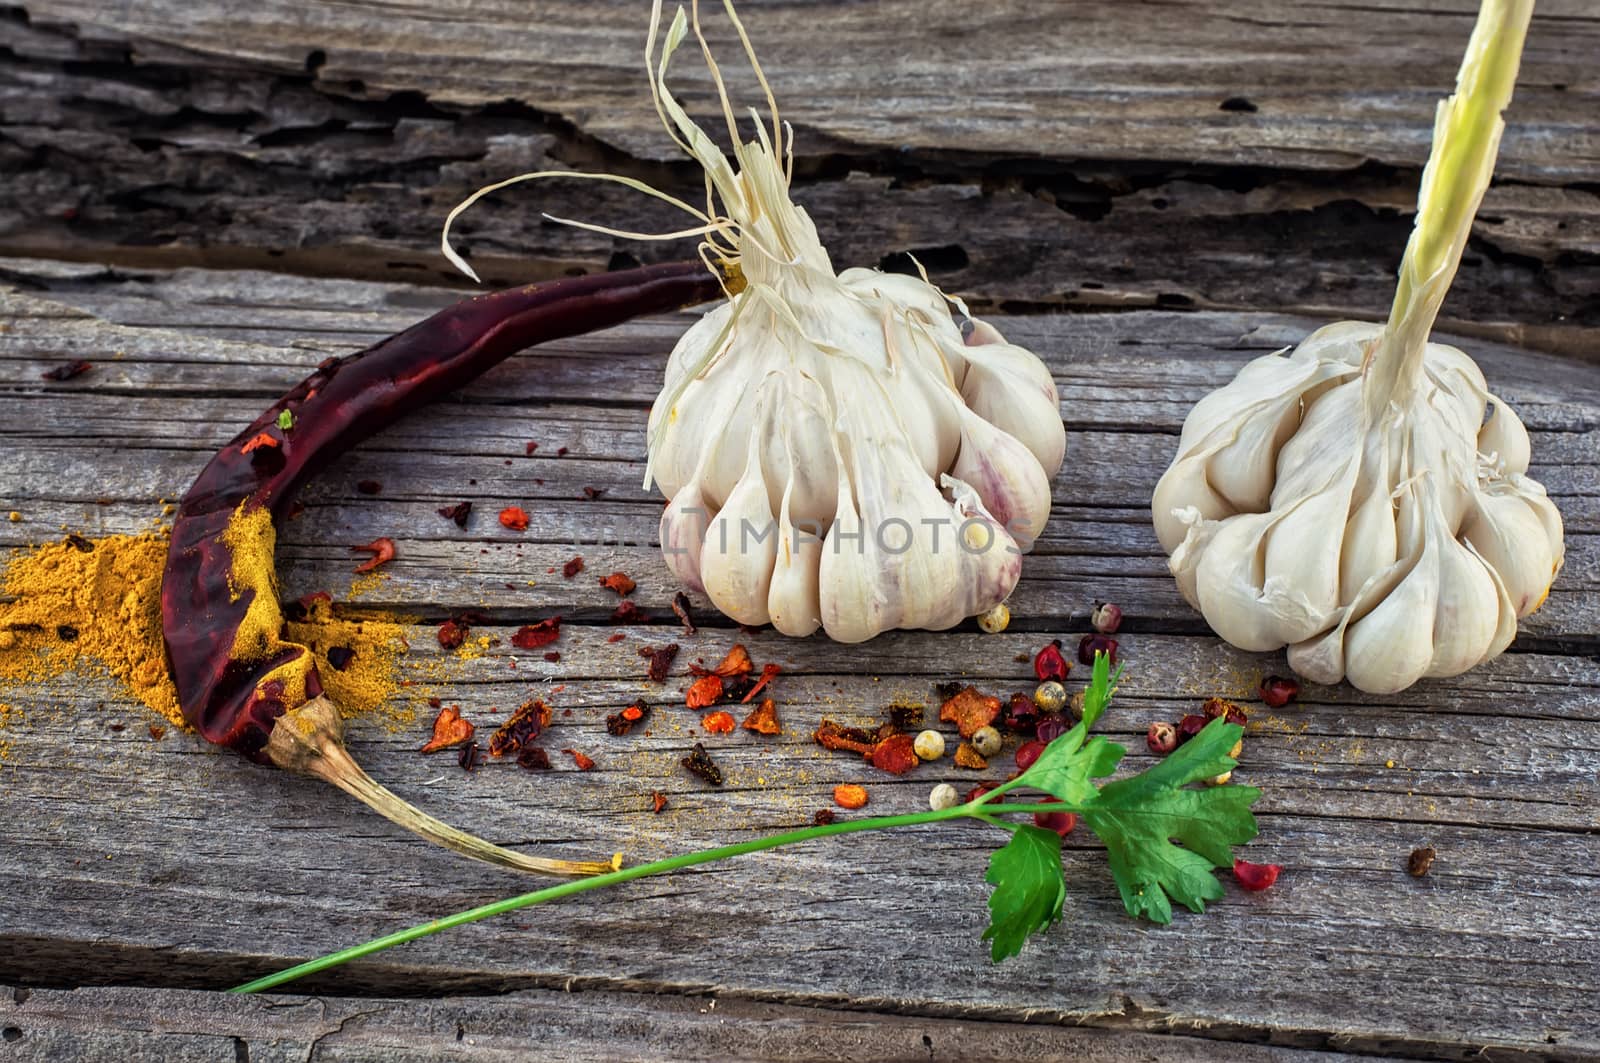 garlic,pepper and seasoning on wooden vintage background.Selective focus